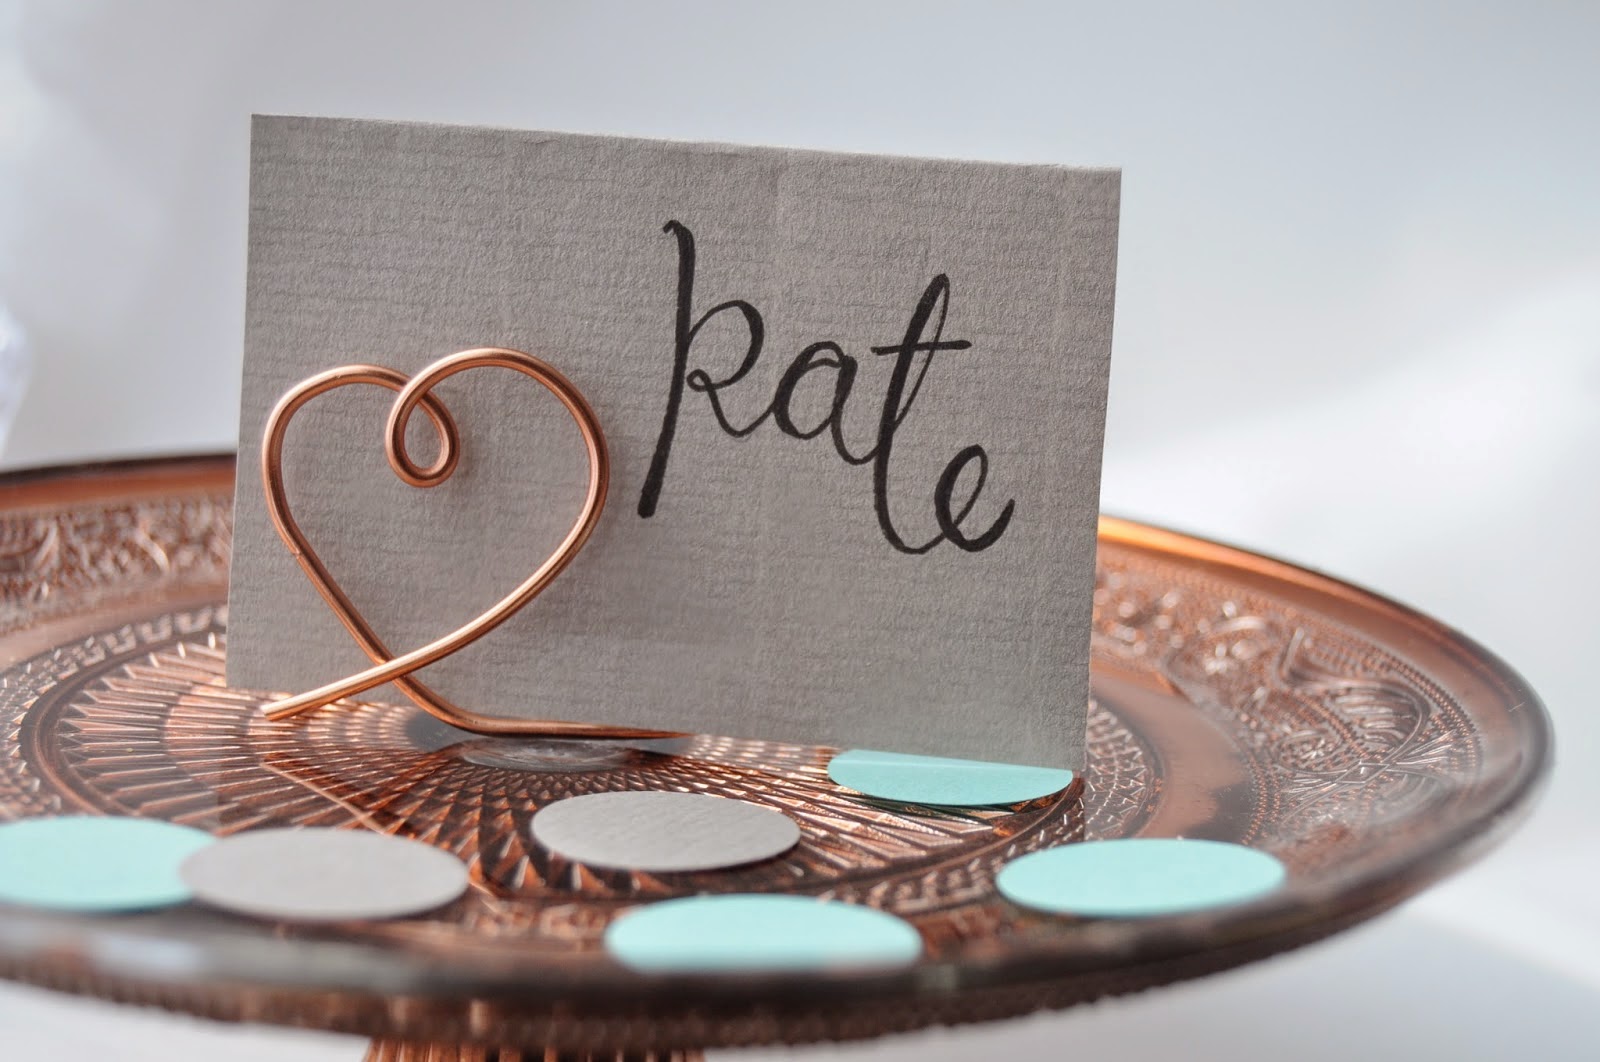 http://thecuriouslifeoflisa.blogspot.co.uk/2015/04/diy-wire-place-card-holders.html